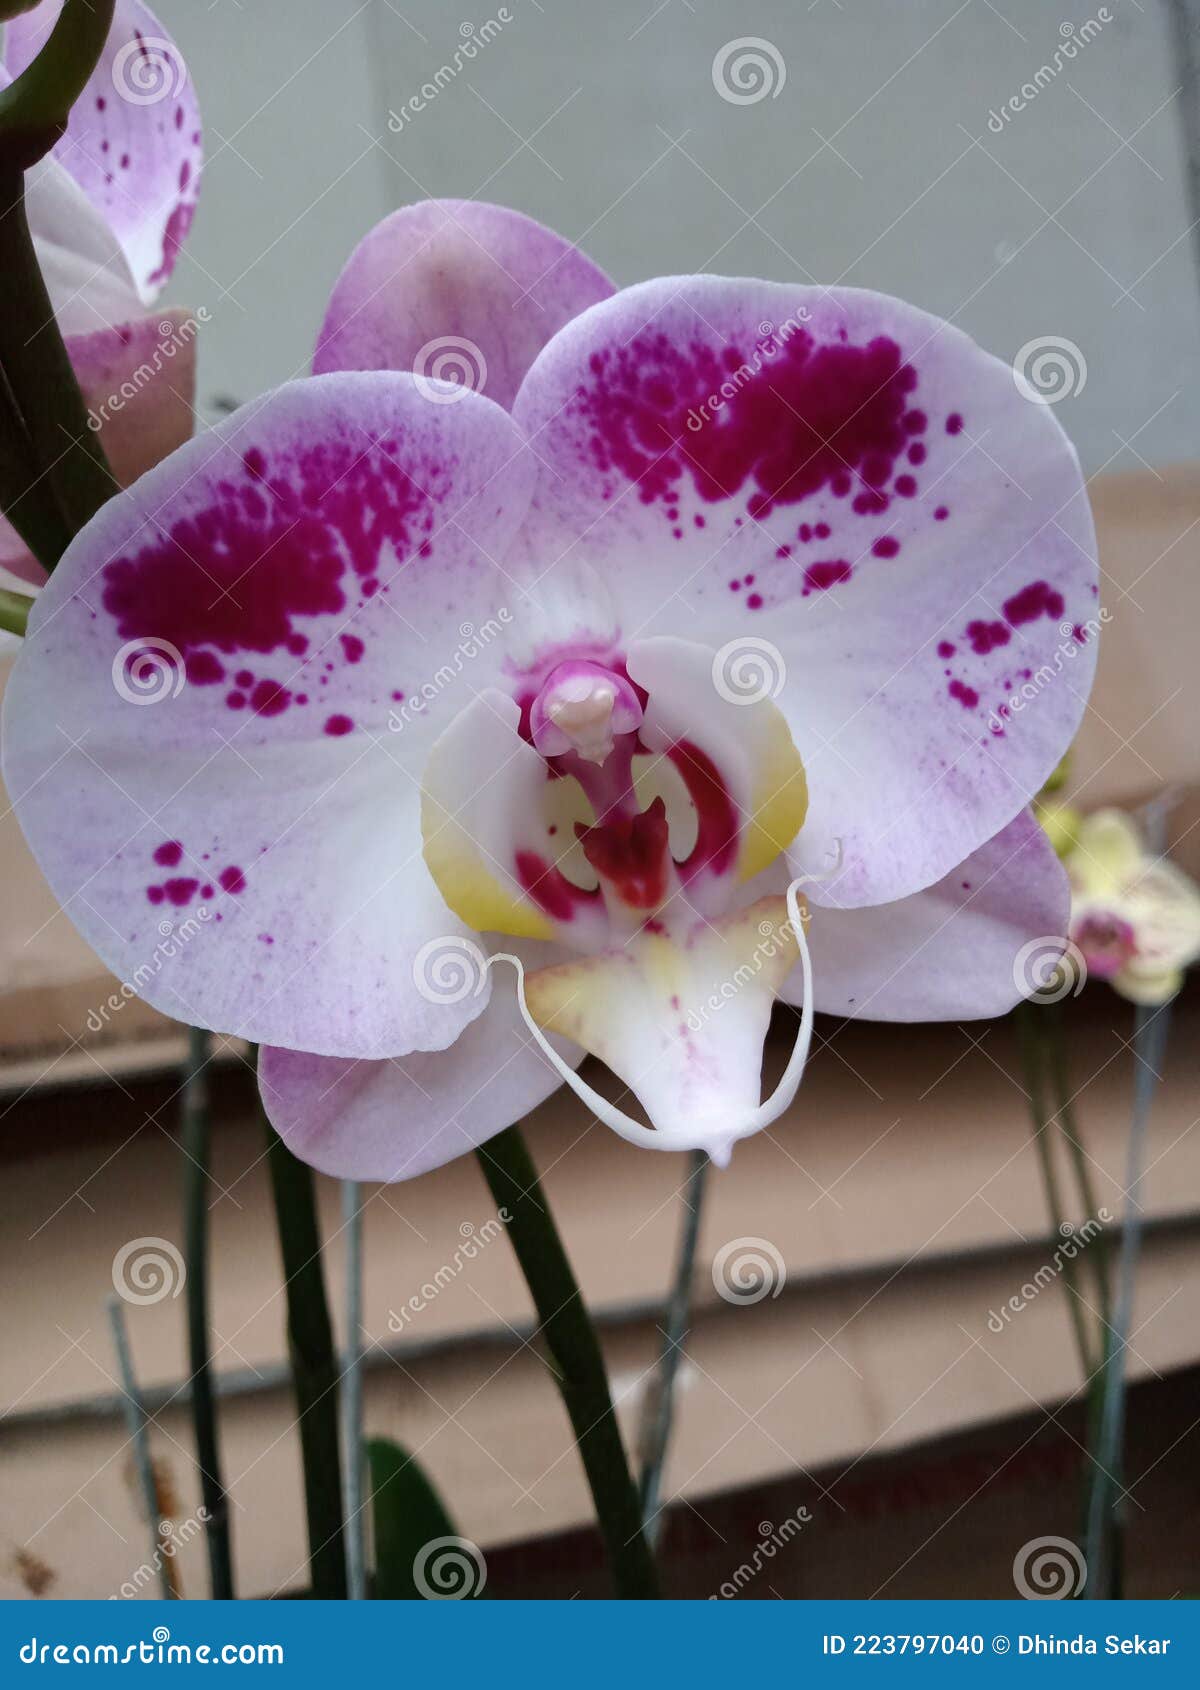 indonesian flowers, namely orchids